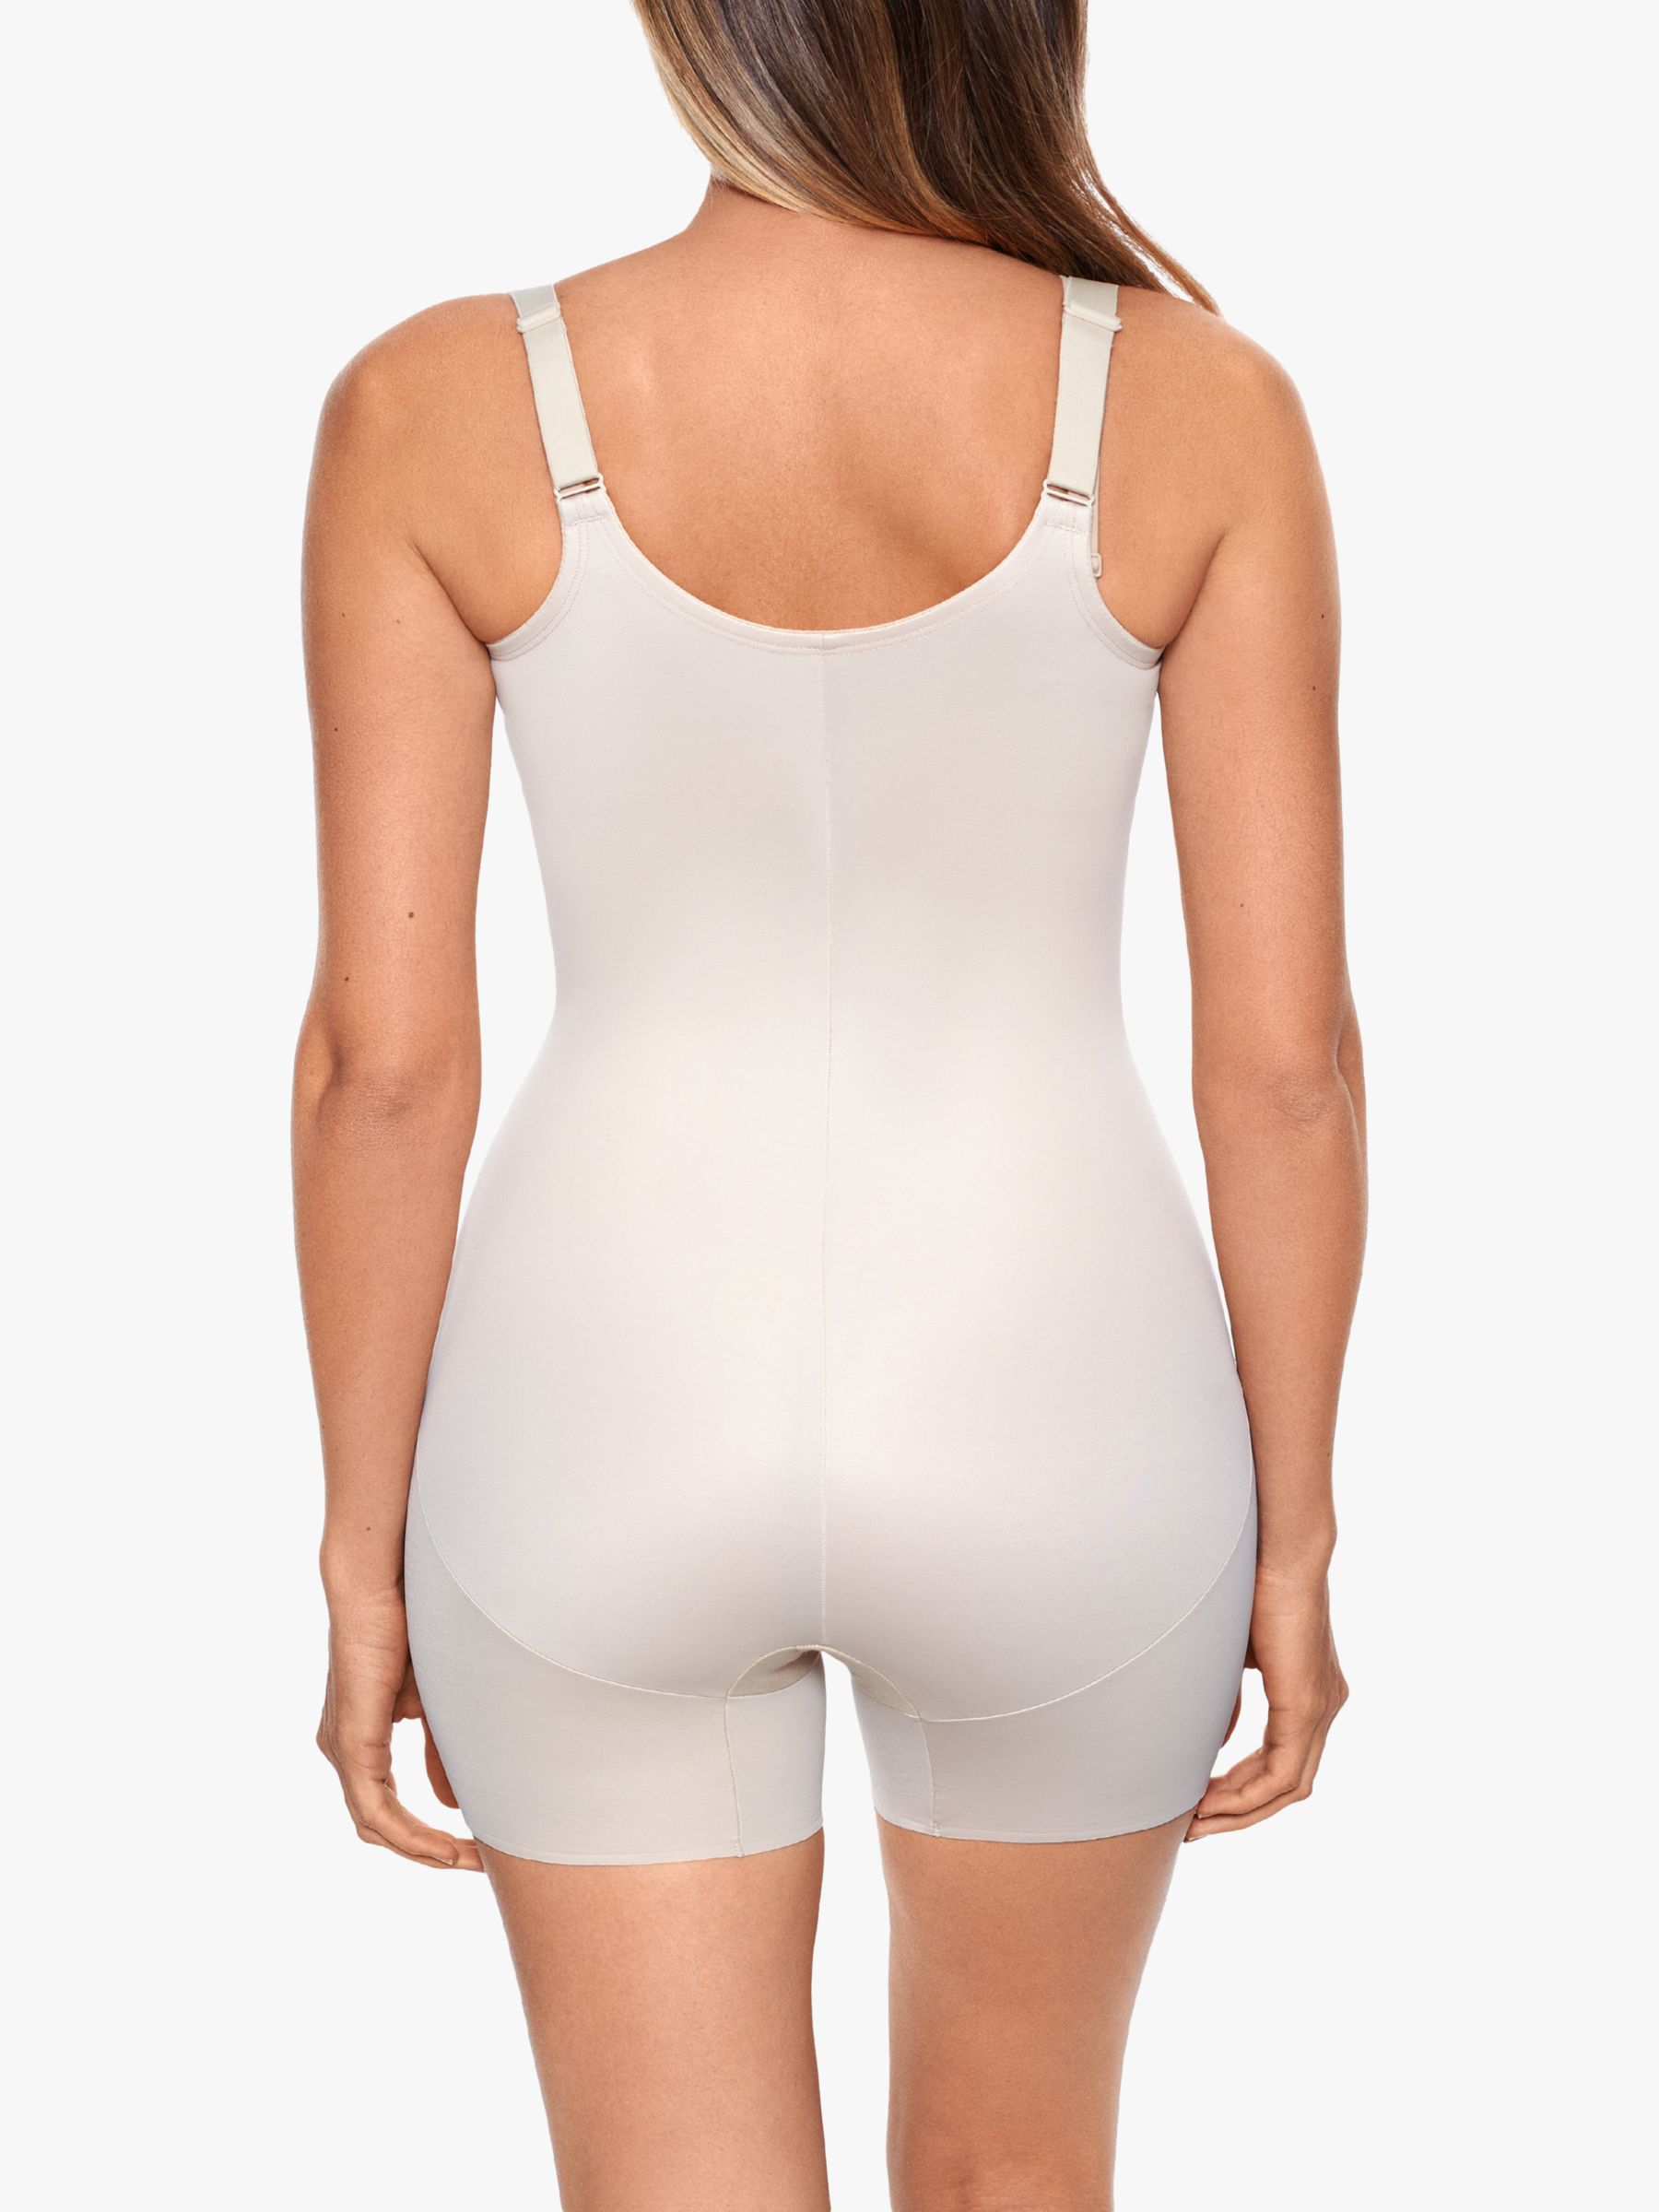 MIRACLESUIT Shapewear FIT & FIRM Bodysuit EXTRA FIRM Spanx Body Shaper NUDE  2X